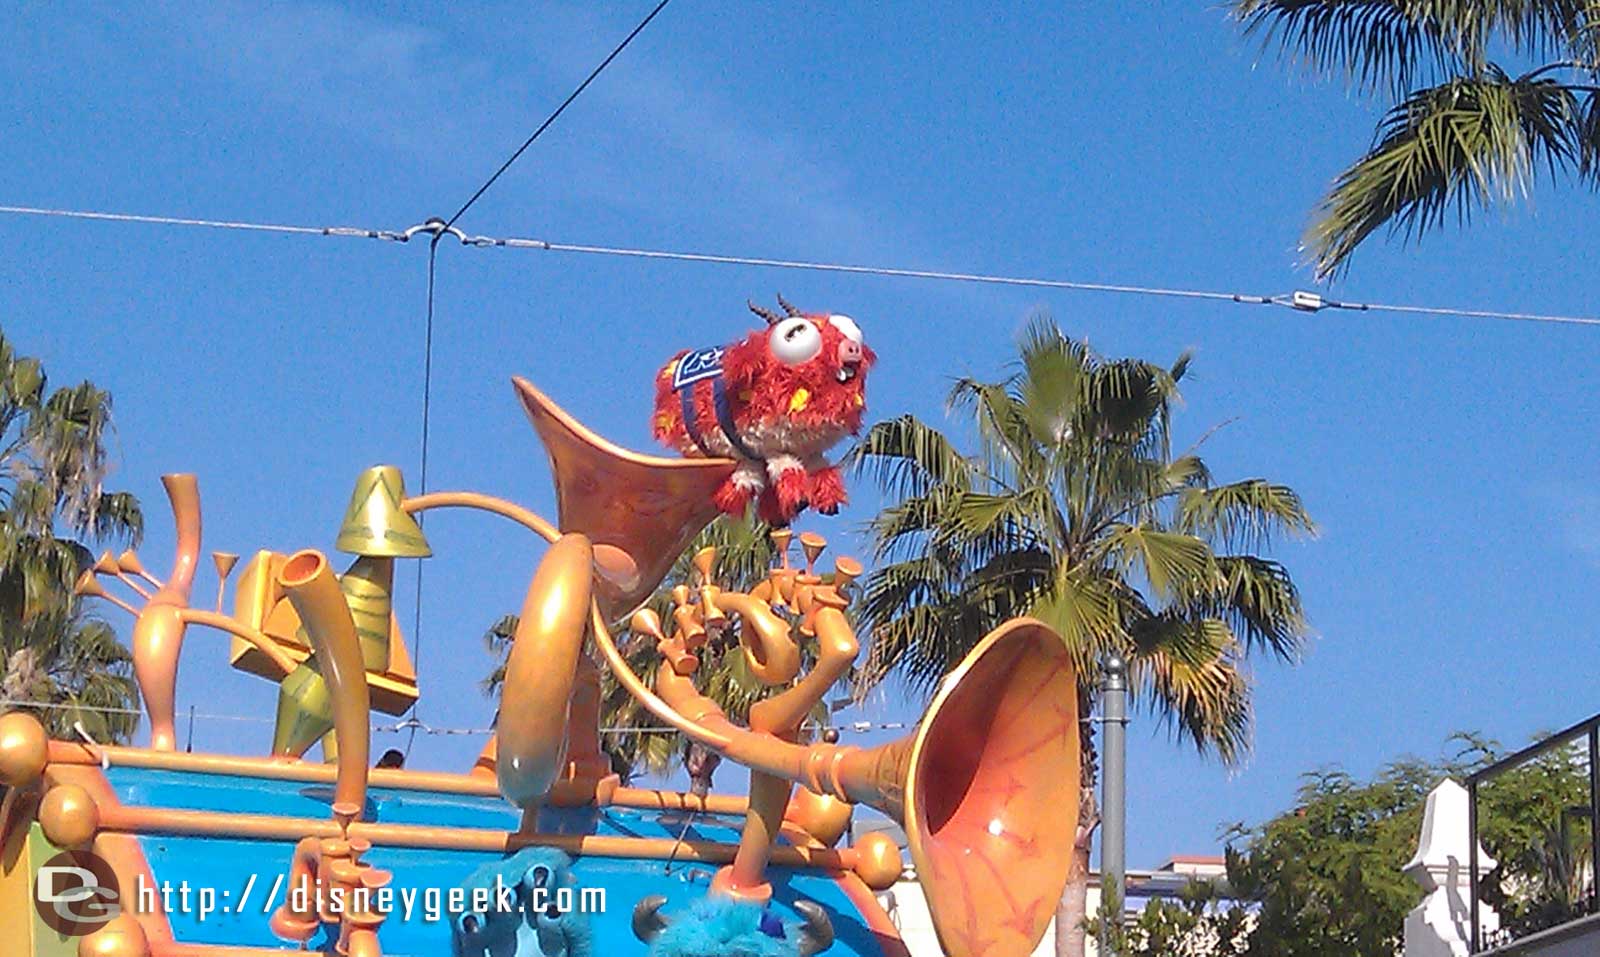 Even the Fear Tech mascot is in the Pixar Play Parade